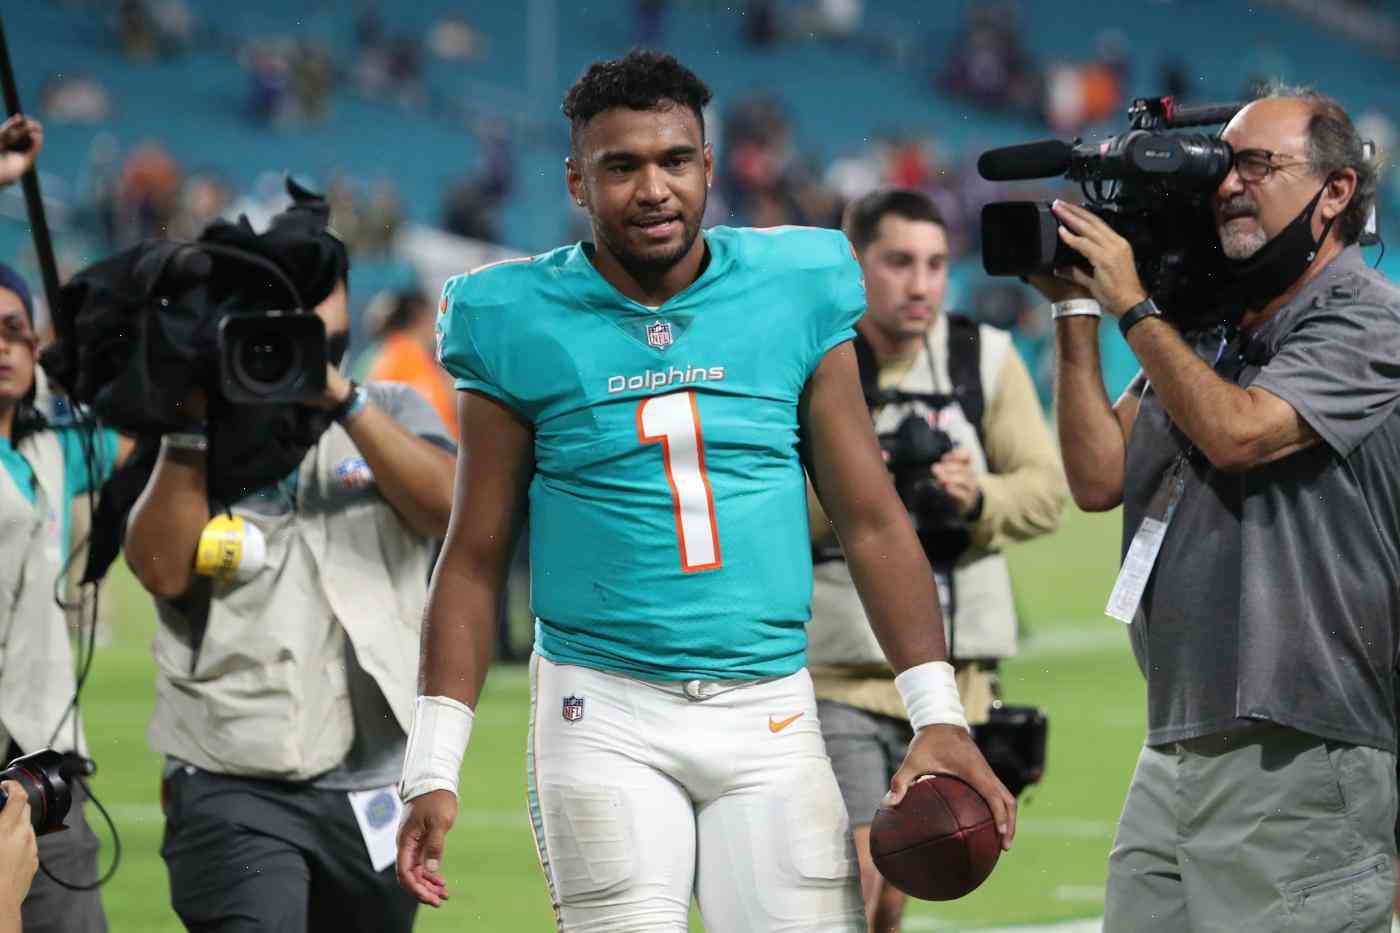 Week 3 NFL Power Rankings: The Dolphins still are very much a work in progress